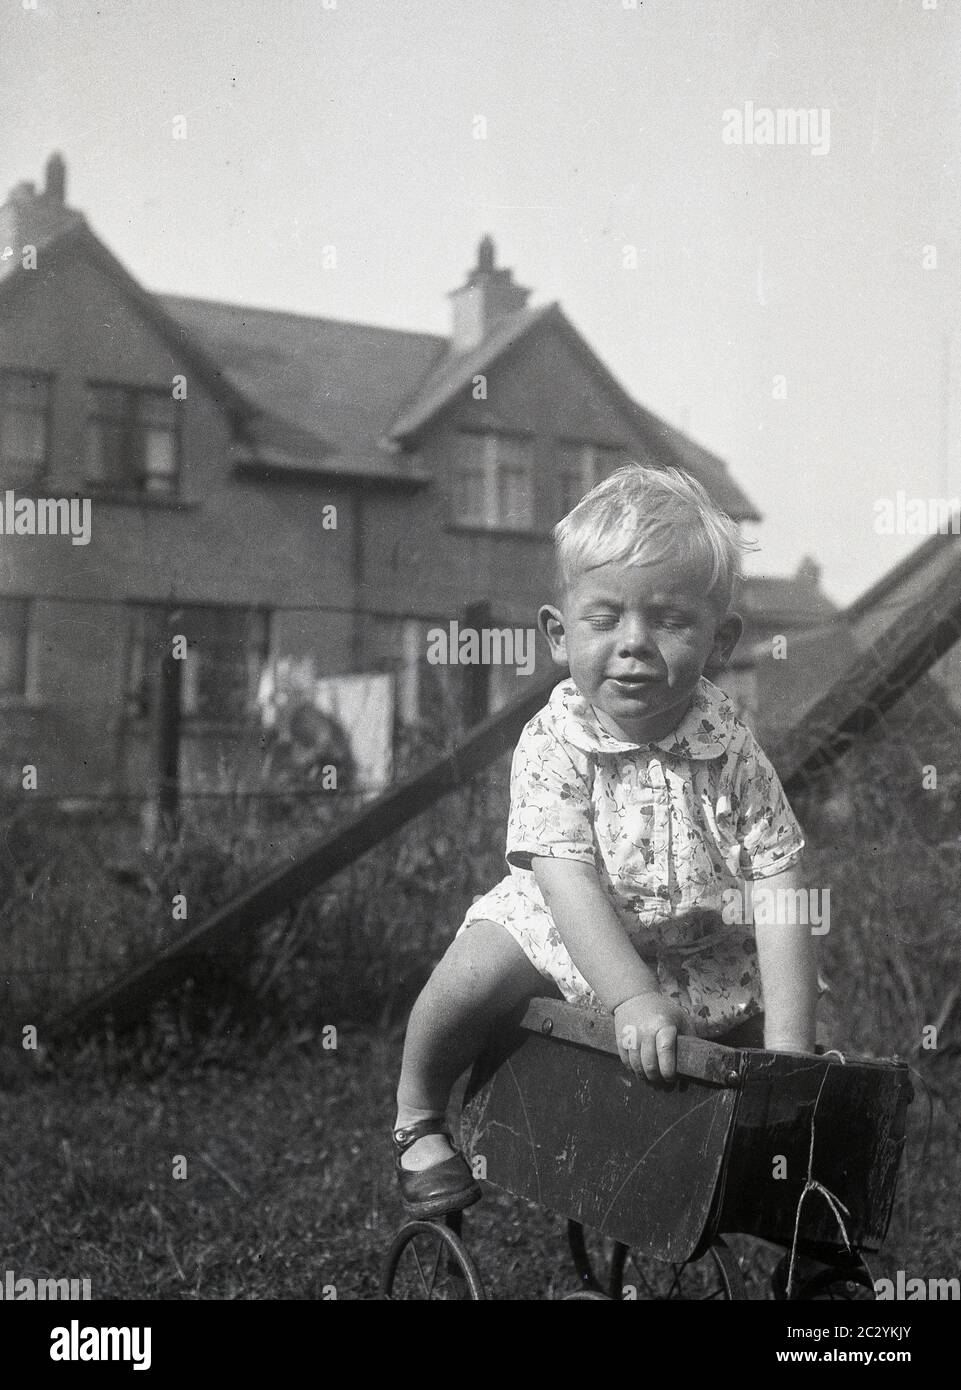 circa 1930s, historical, daytime and a little boy playing outside in a garden, climbing on top of an old metal wheeled child's toy or doll's pram of the era, which has lost its hood and handle, An interesting object to try and climb on and the little child shows good balance! Stock Photo